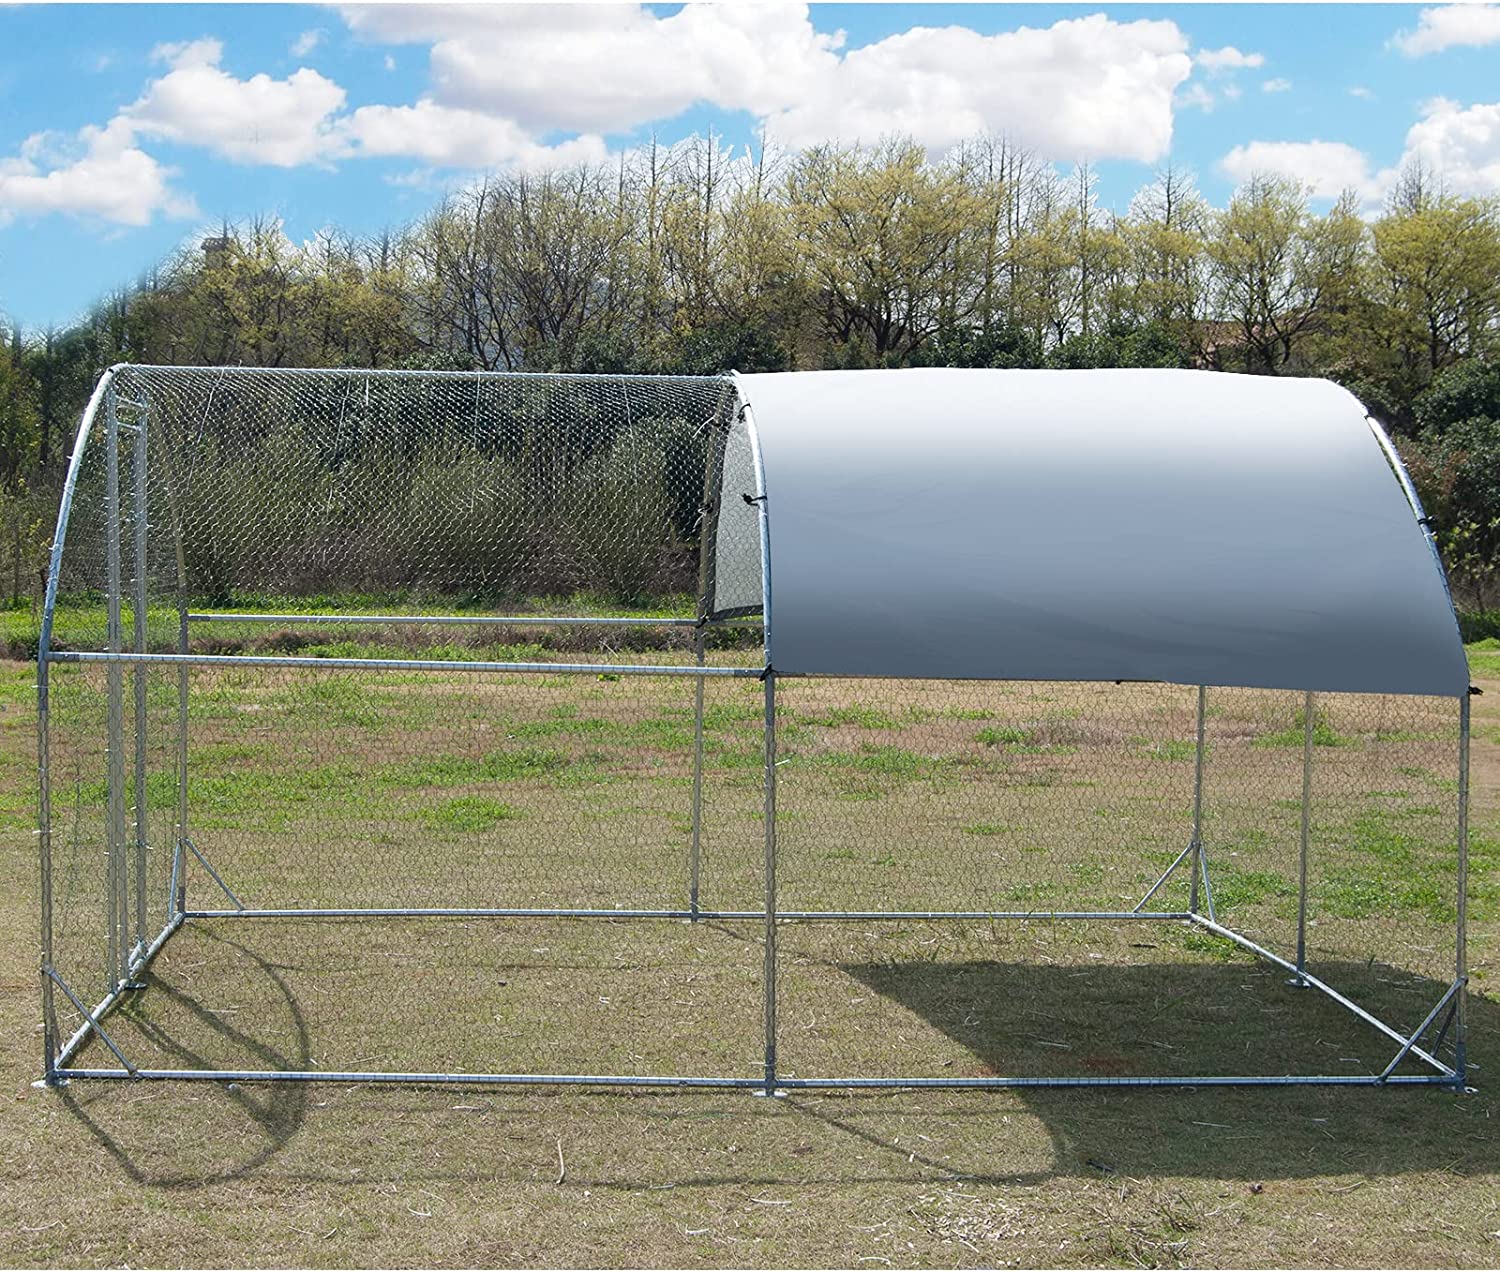 Dome-shaped chicken coop lockable door with UV protection cover